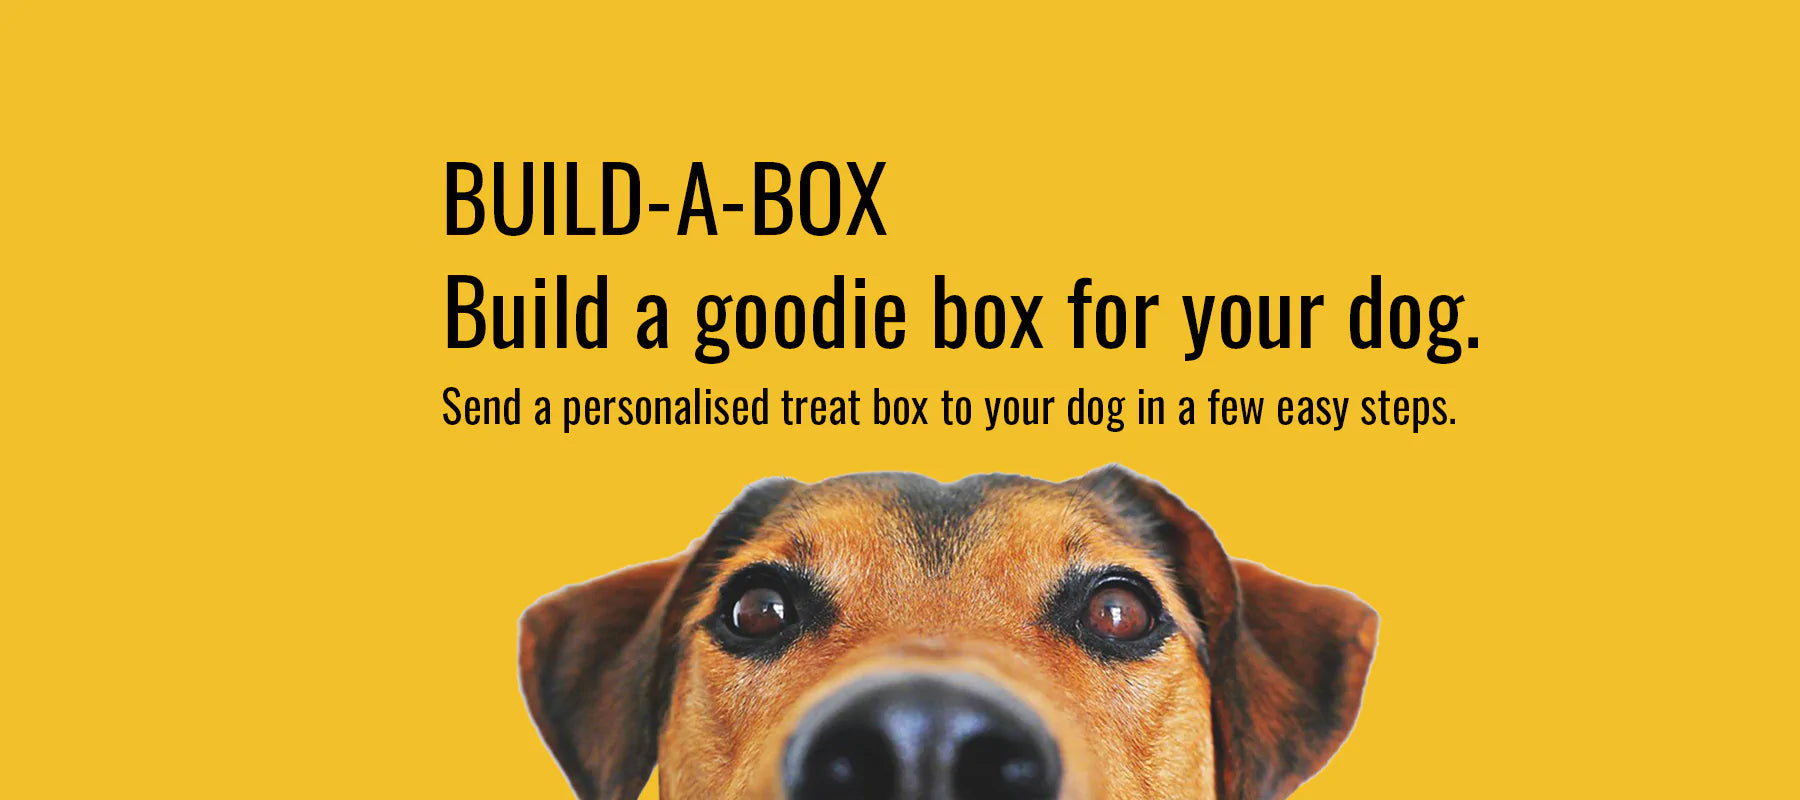 Build-A-Box: Build your own personalised and custom dog treat box and pick and select your dog's favourite food, treats, and toys.